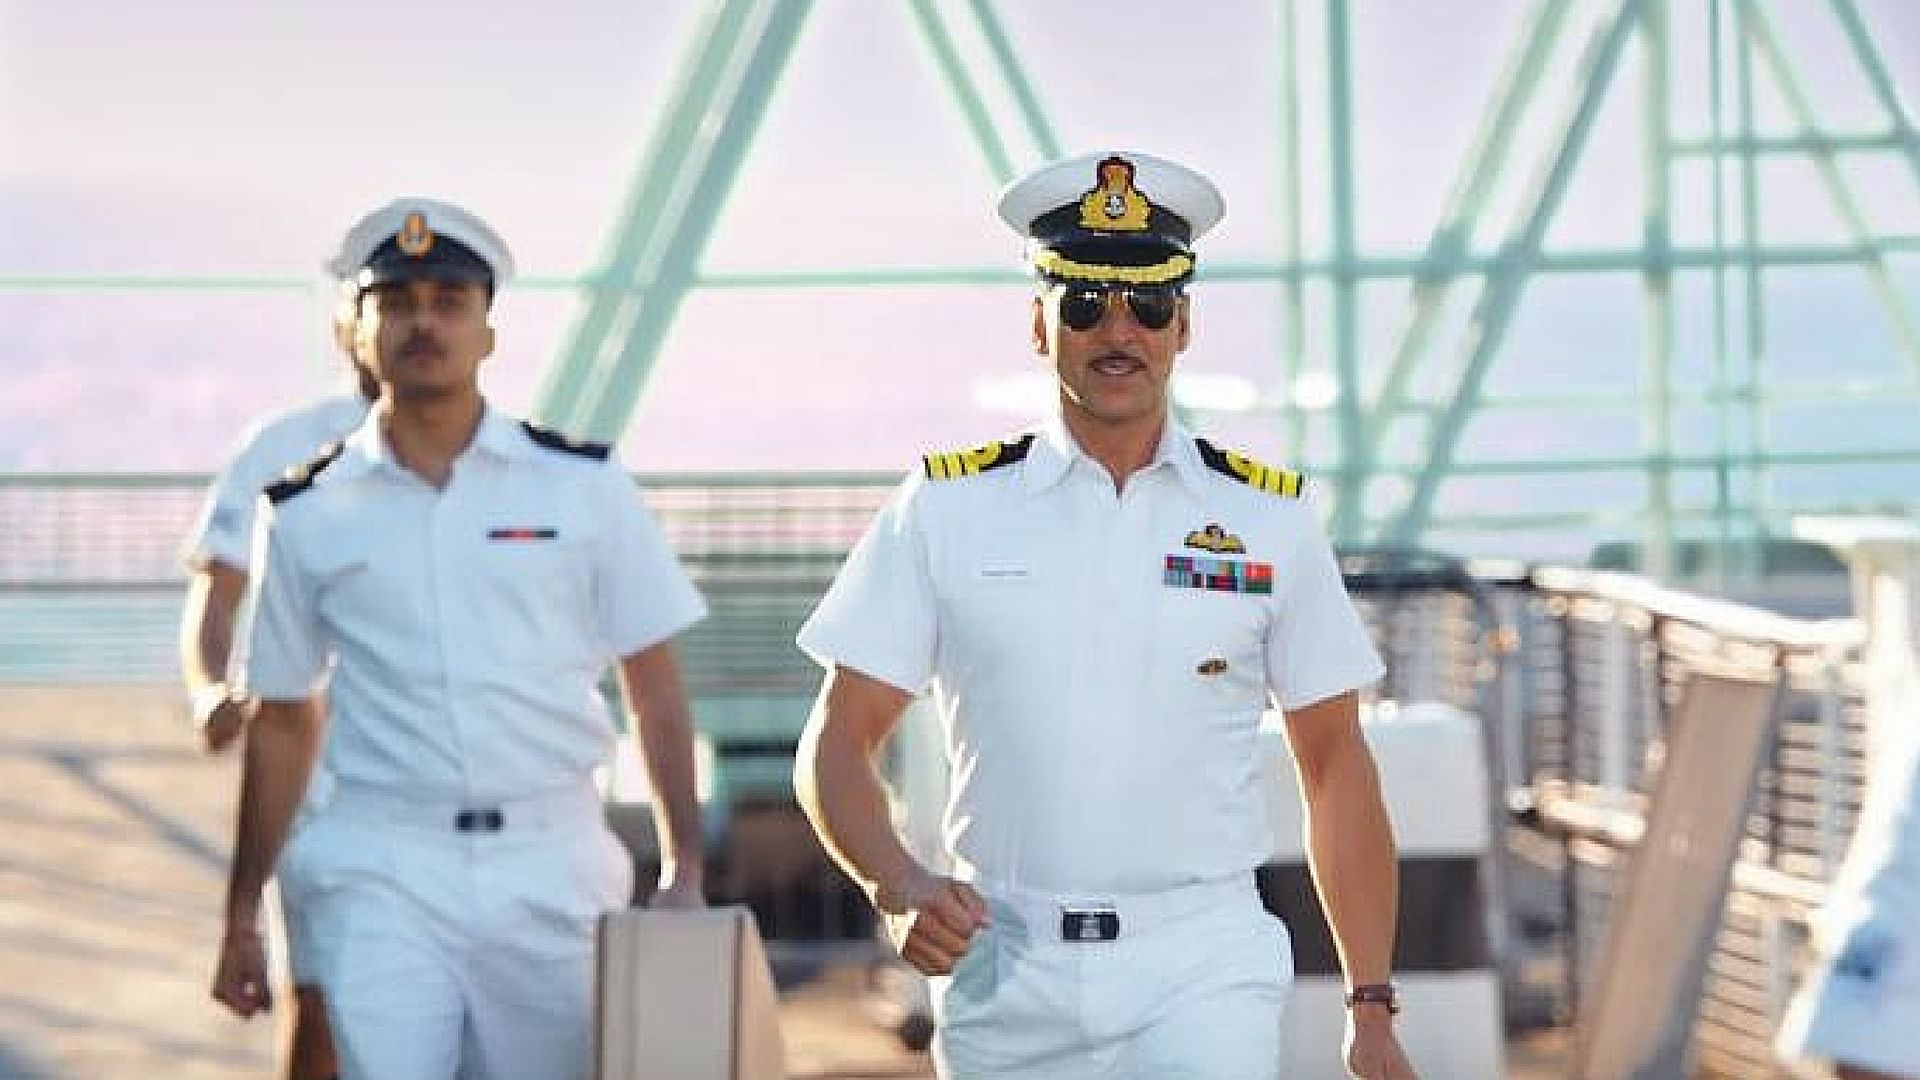 Rustom costume auction: Legal notice sent to Akshay Kumar-Twinkle Khanna  for 'playing with sentiments' of armed forces